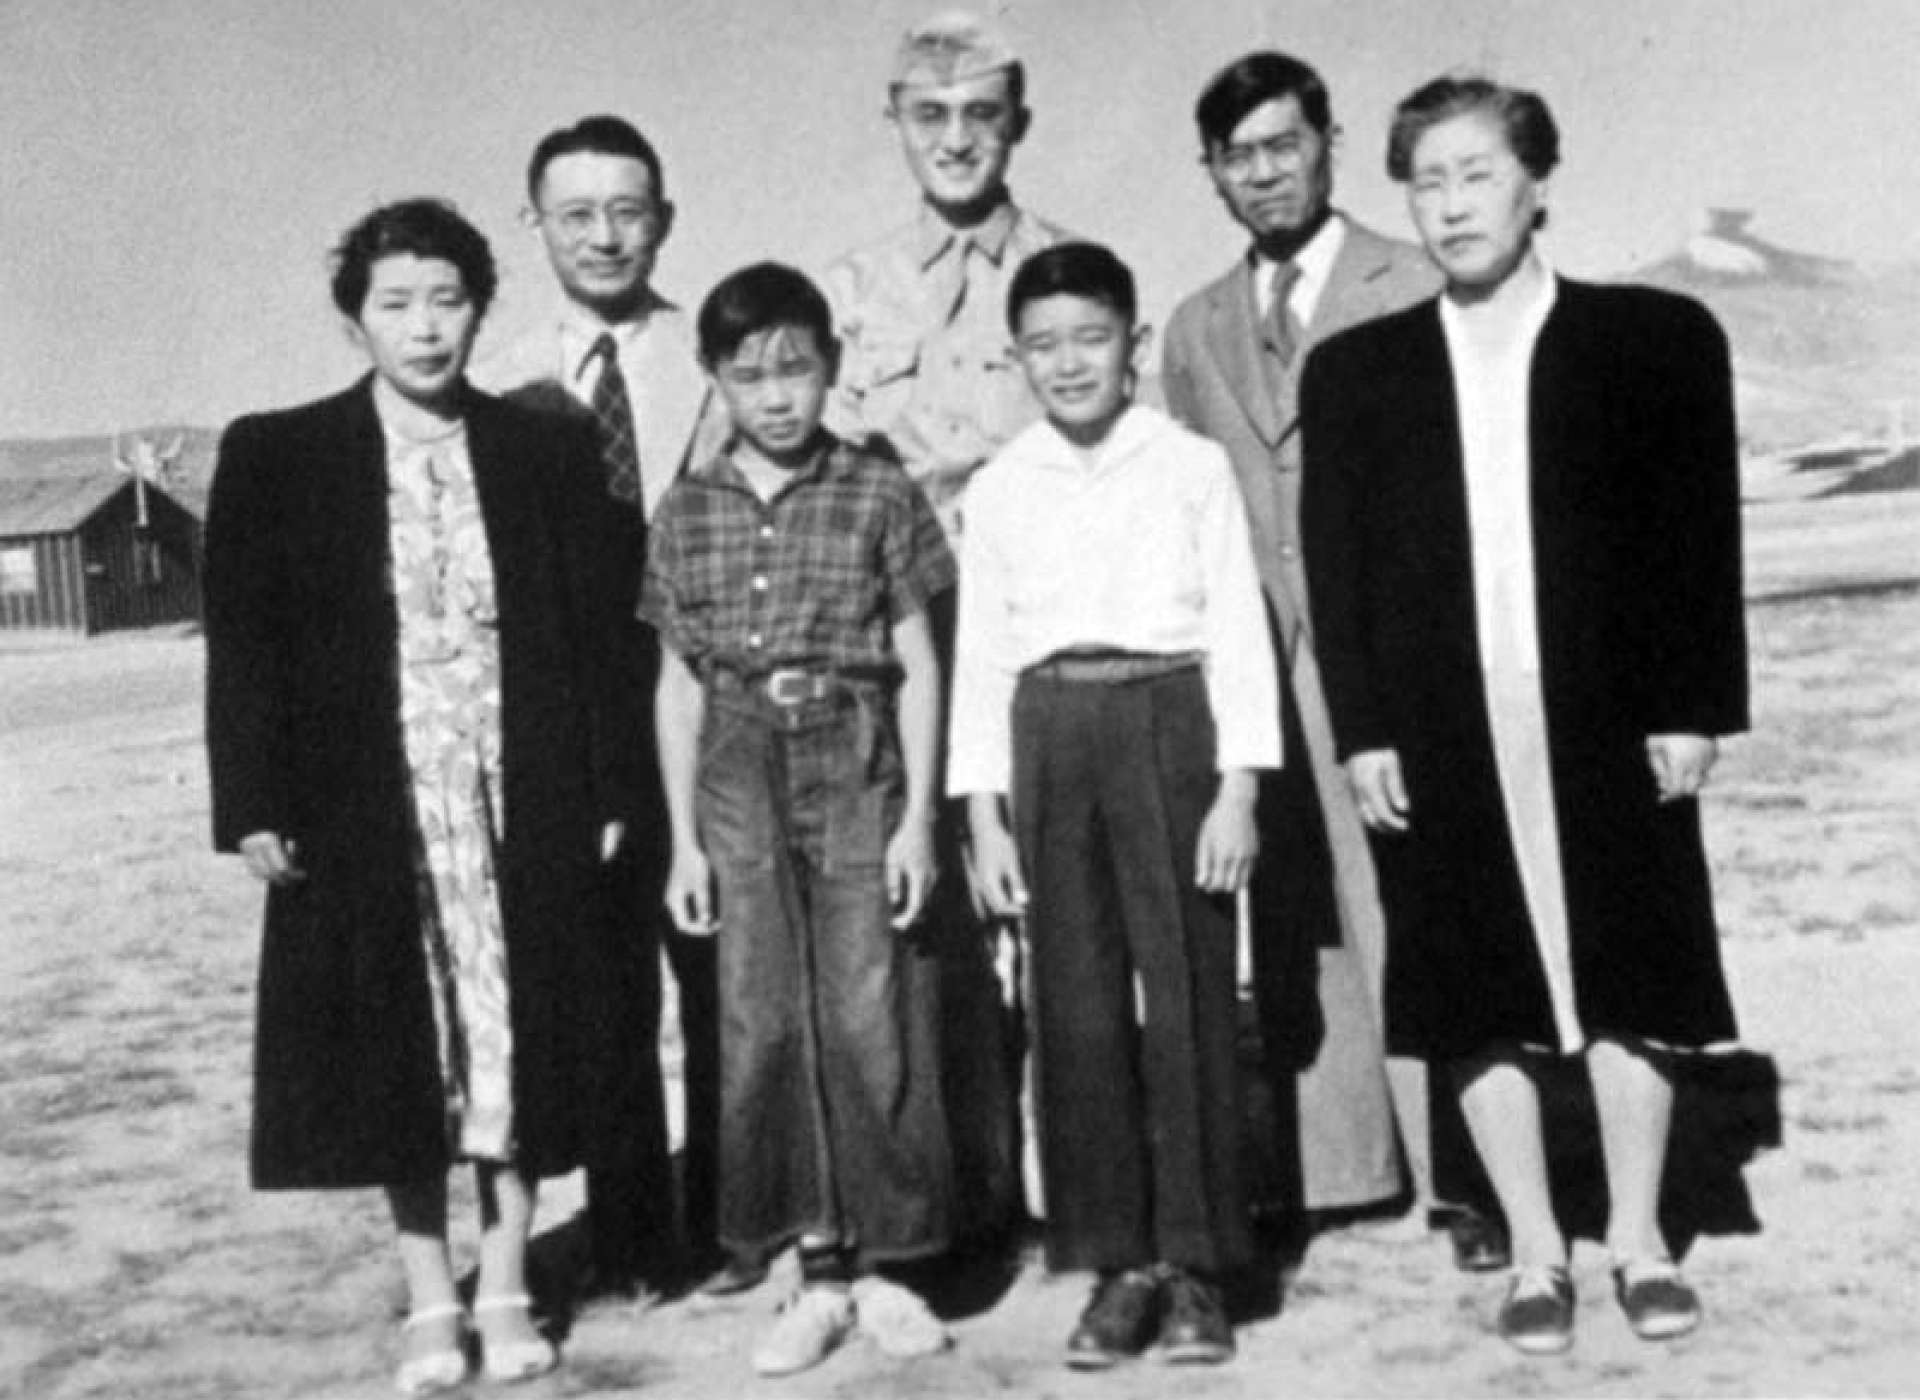 Norm and his family are forcibly removed from their home in San Jose, California, and sent to Heart Mountain WWII Internment Camp in Wyoming.